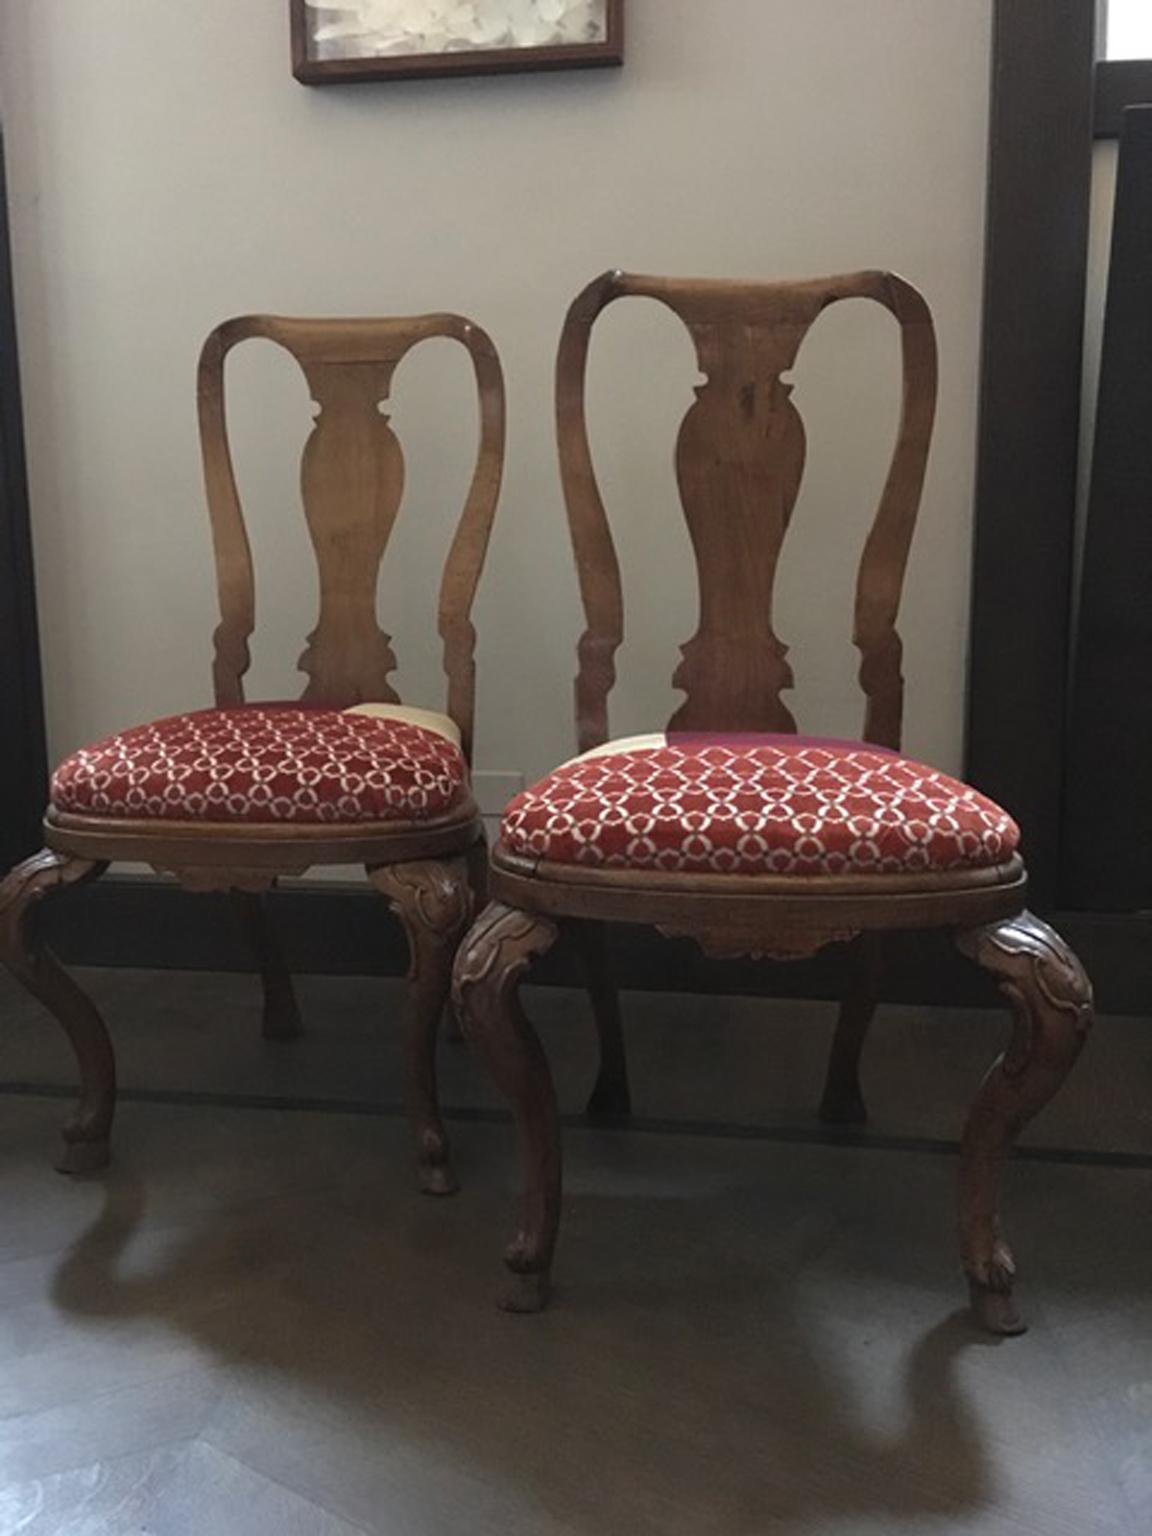 This is a very beautiful pair of elegant dining chairs hand carved in solid oak.
Their shapes are gorgeous and the proportions makes them an important presence in a dining room. Deeply engraved the legs are a little masterpiece of